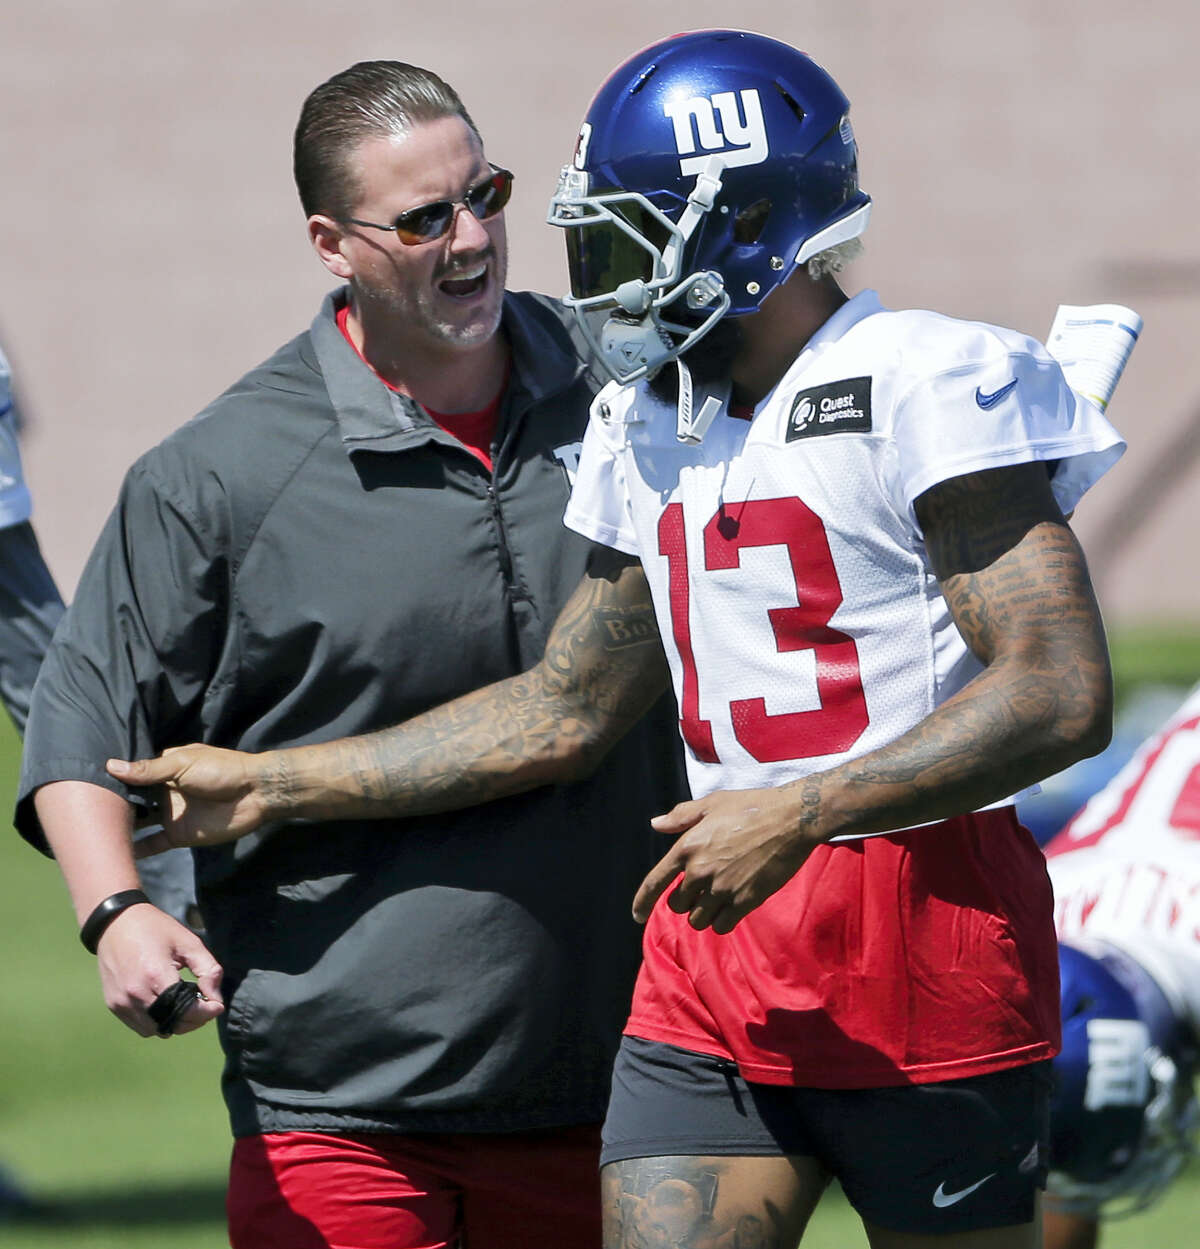 New York Giants head coach Ben McAdoo, left, talks with Odell Beckham, Jr. during training camp on Sunday.